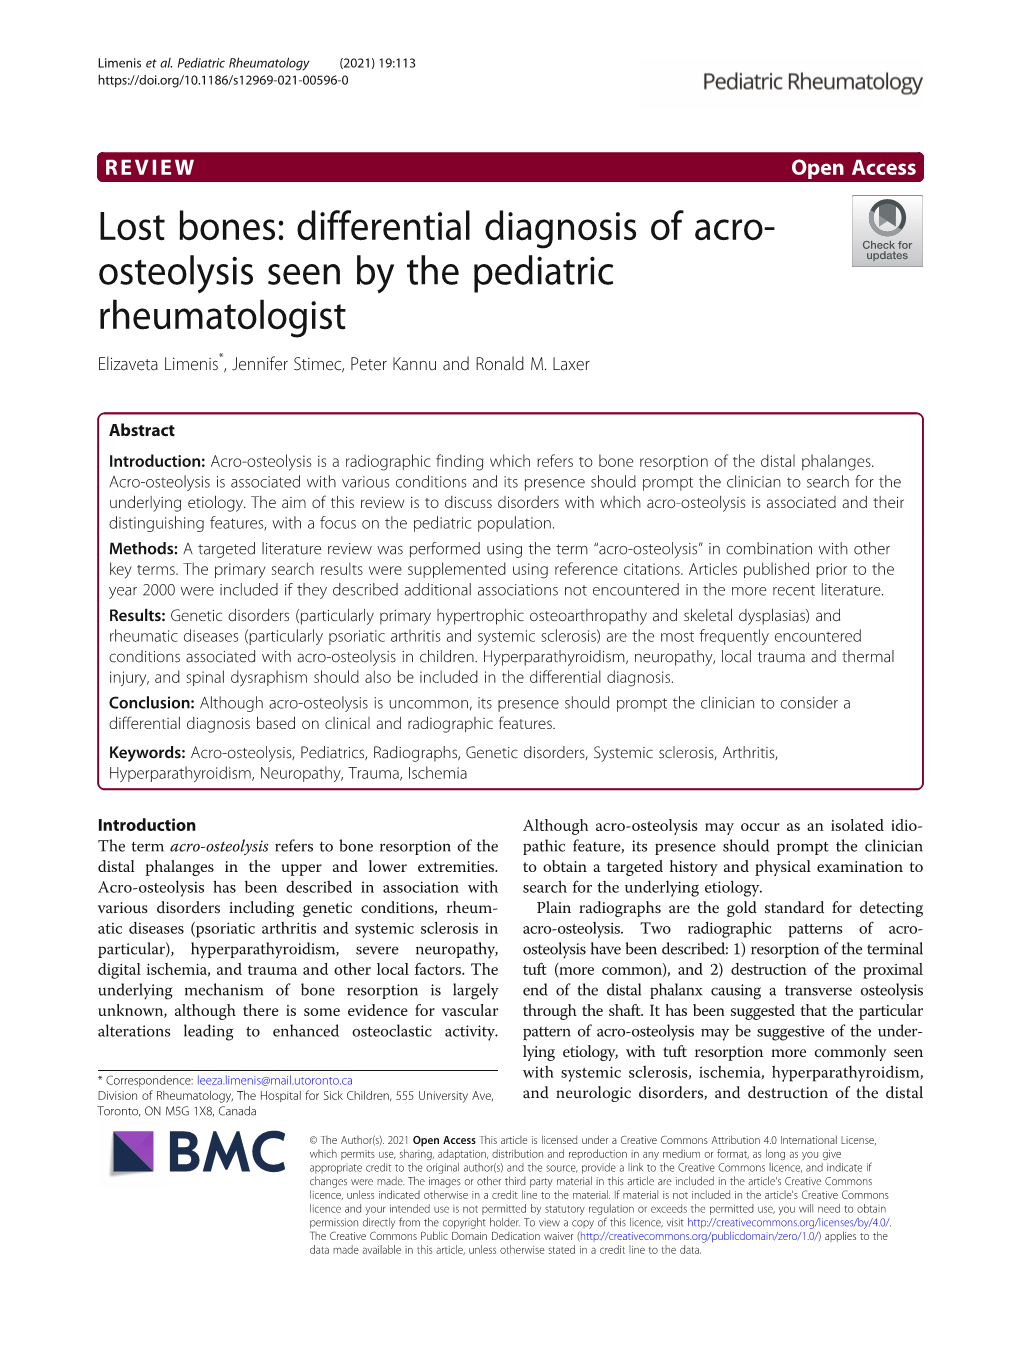 Lost Bones: Differential Diagnosis of Acro-Osteolysis Seen by The